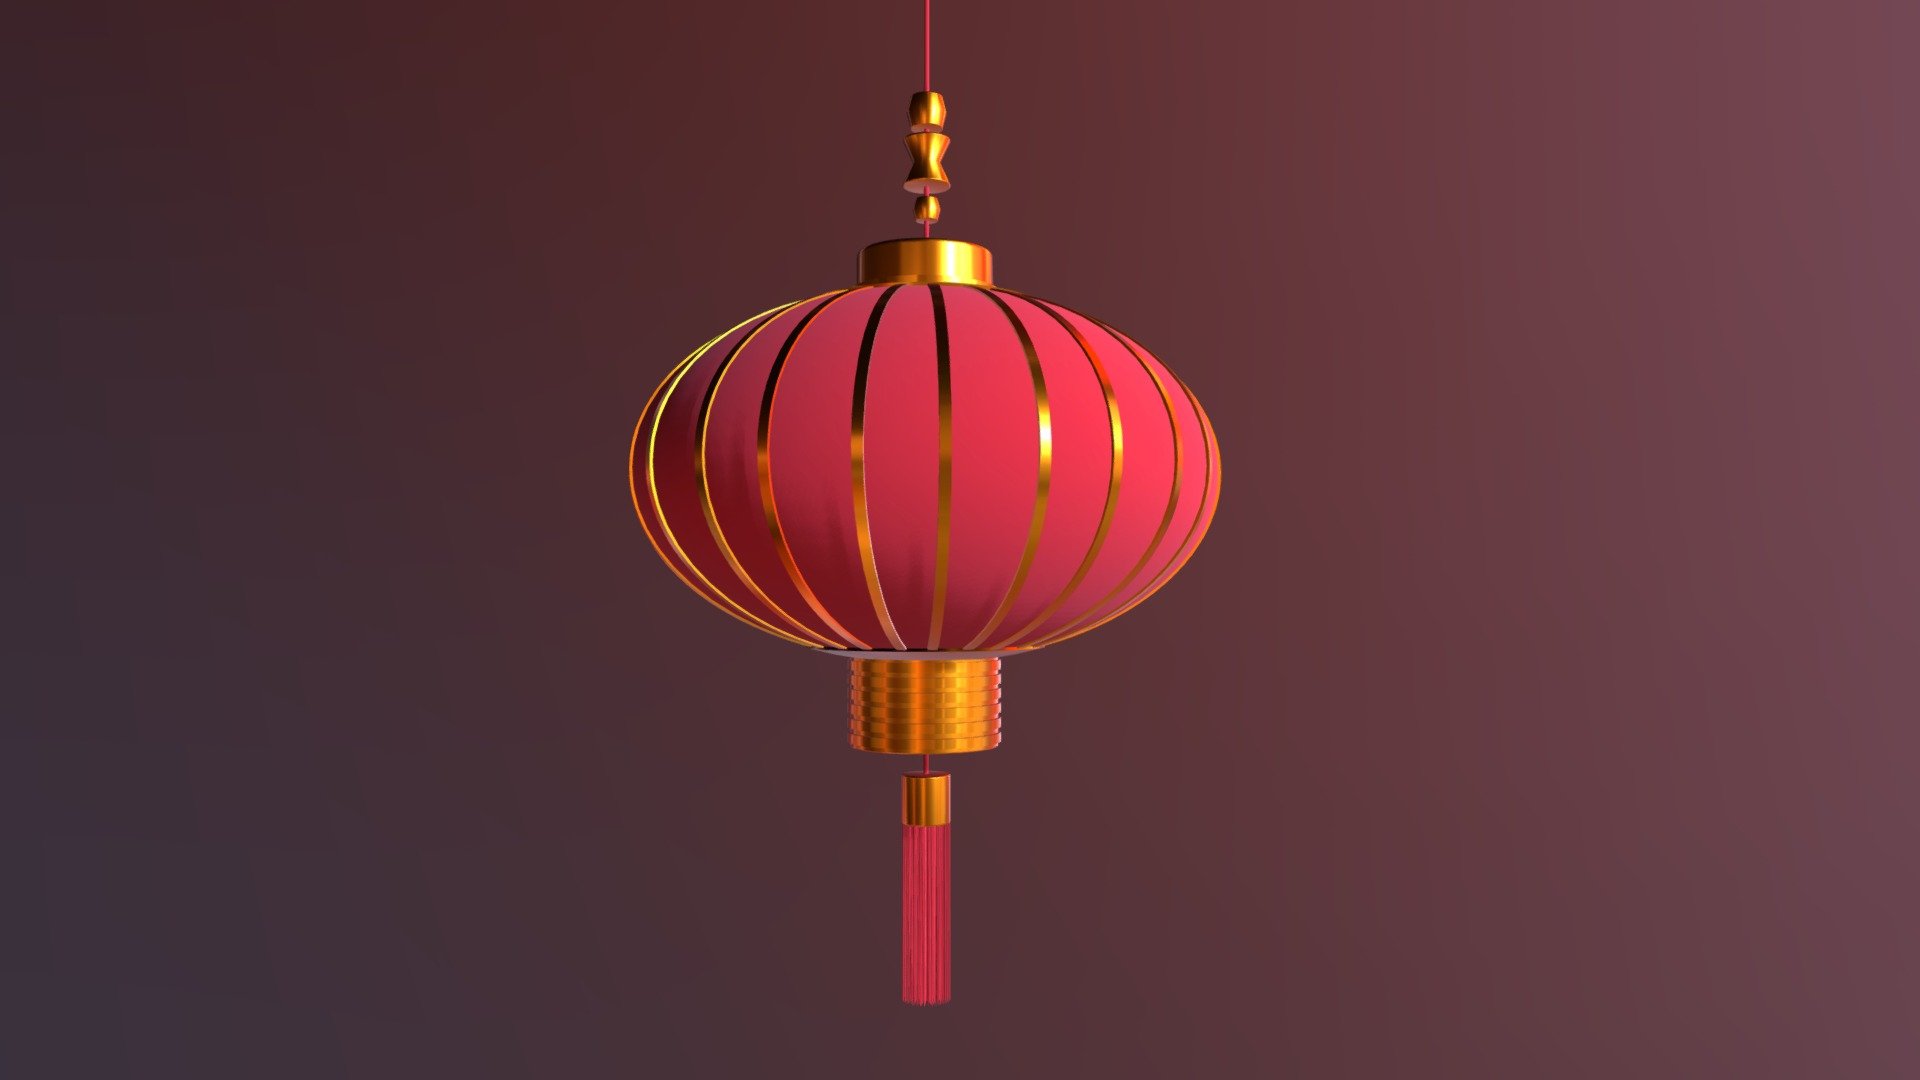 LANTERN

Modeled in 3D Max 2013. Used as design Interior, Exterior, decoration holiday, decor lunar new year, setup display holiday asian &amp; Art Design product…Hope you like it! 

INCLUDE FILE

File Formats: - 3D Max 2016 - Cinema 4D R19 - FBX (Multi Format) - OBJ (Multi Format) - 3DS (Multi Format) - STL (Multi Format) - MTL (Multi Format) 

Thank you! - LANTERN - Buy Royalty Free 3D model by DTA DESIGN STUDIO (@dtadesignstudio) 3d model